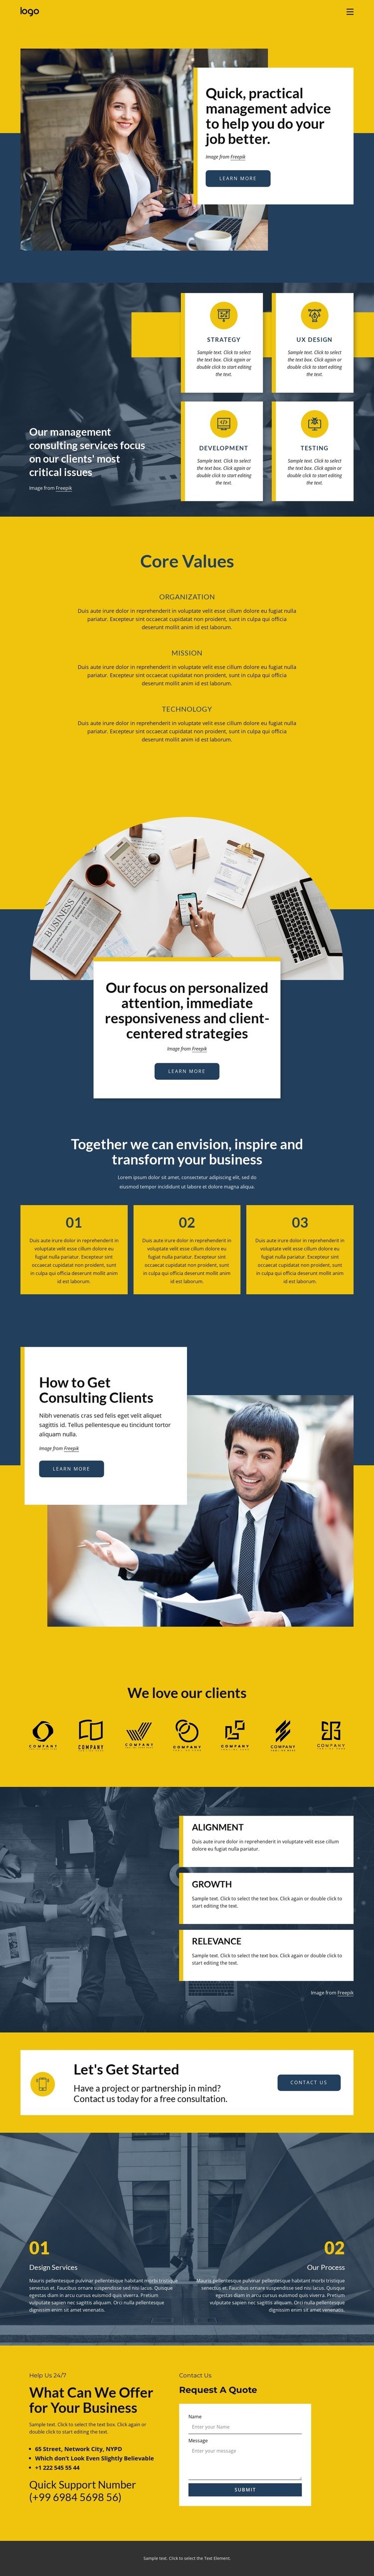 Business consulting firm Homepage Design